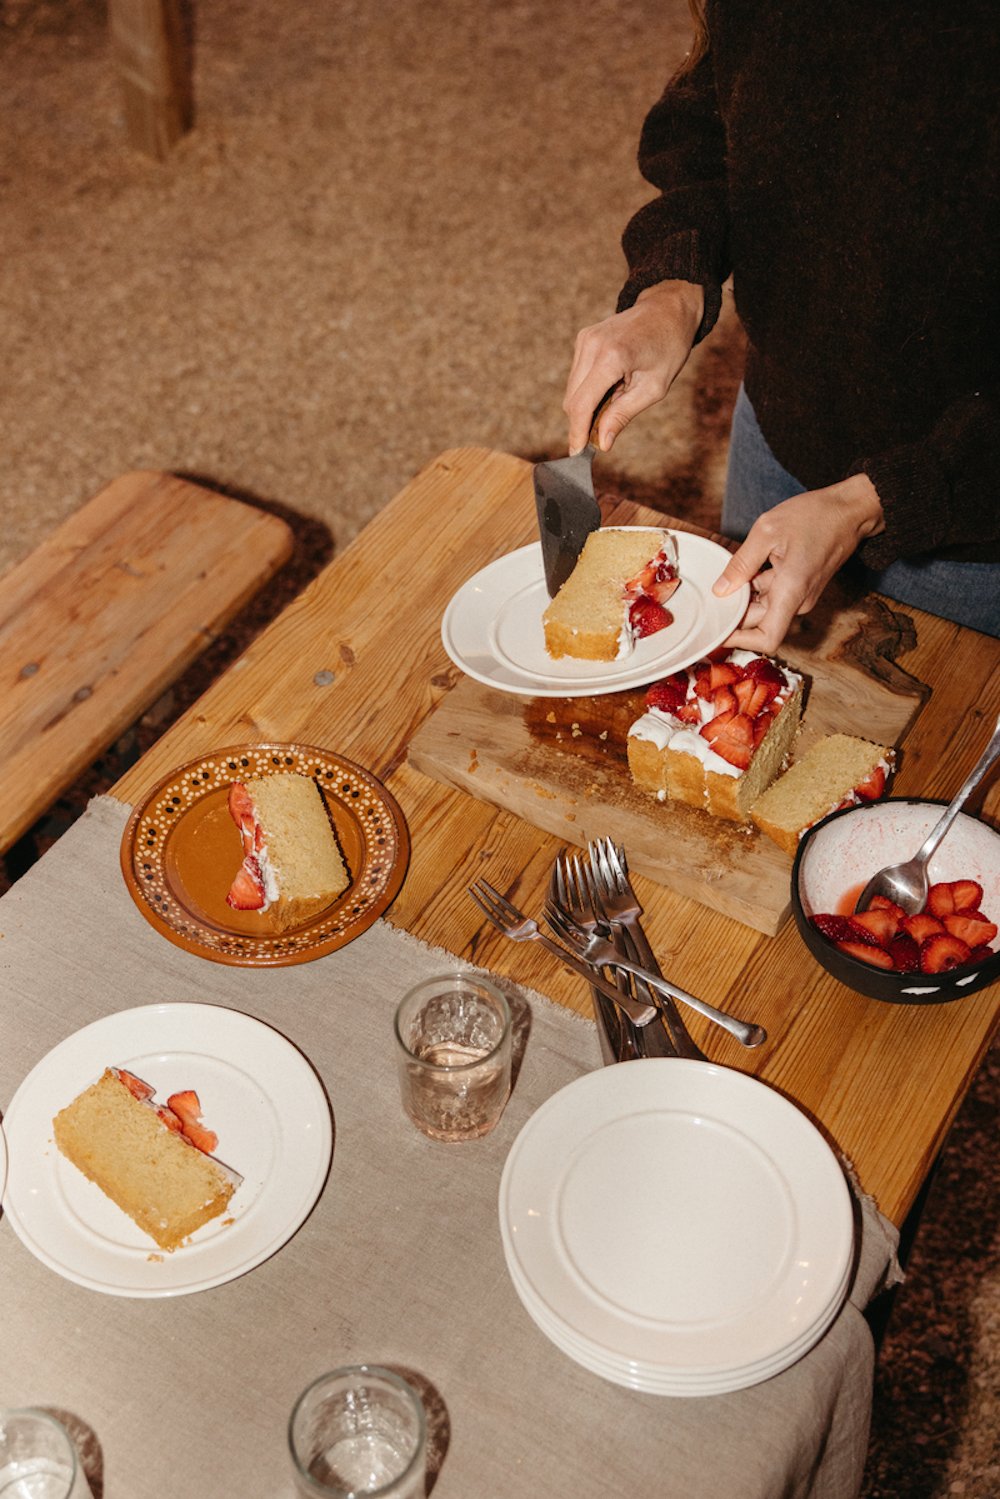 Woman serving slices of yellow loaf cake with strawberries onto various plates at long wooden table.